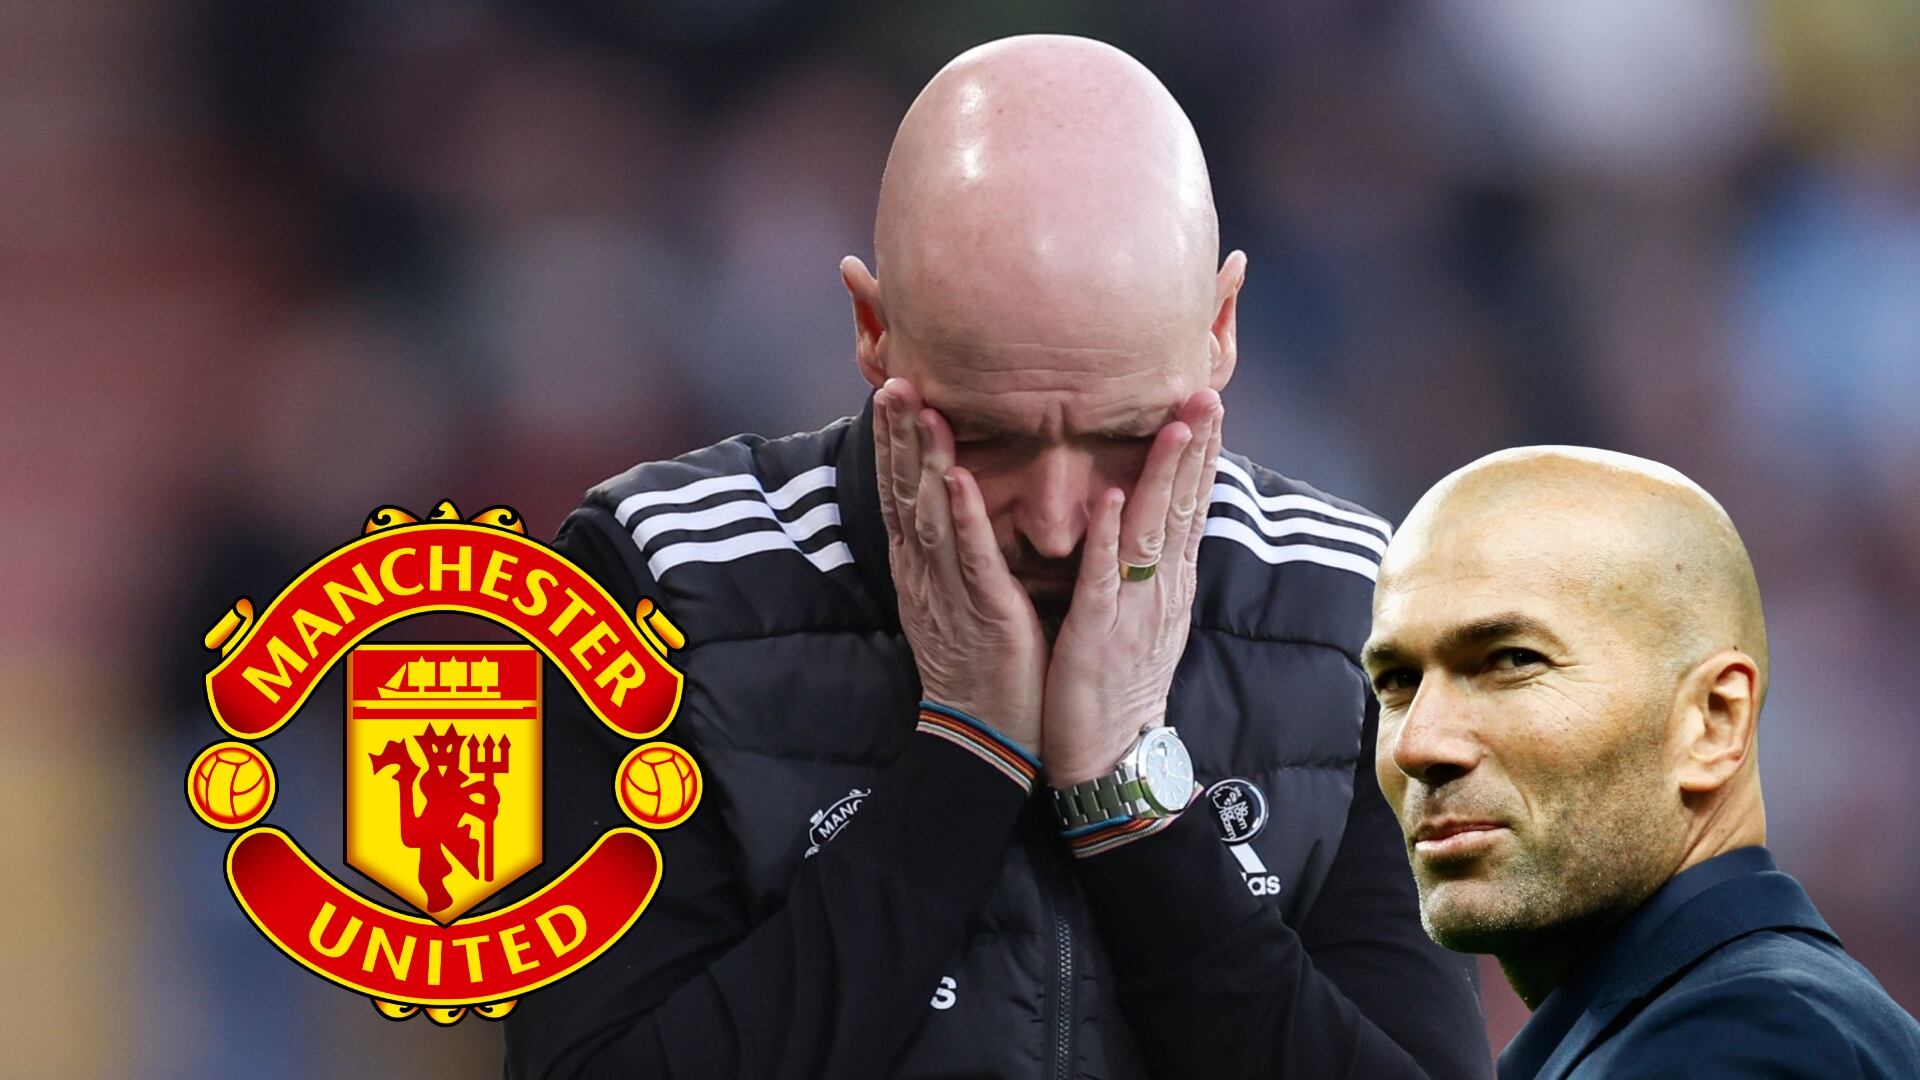 The European giant that could steal Zidane from them this summer, Man United worries